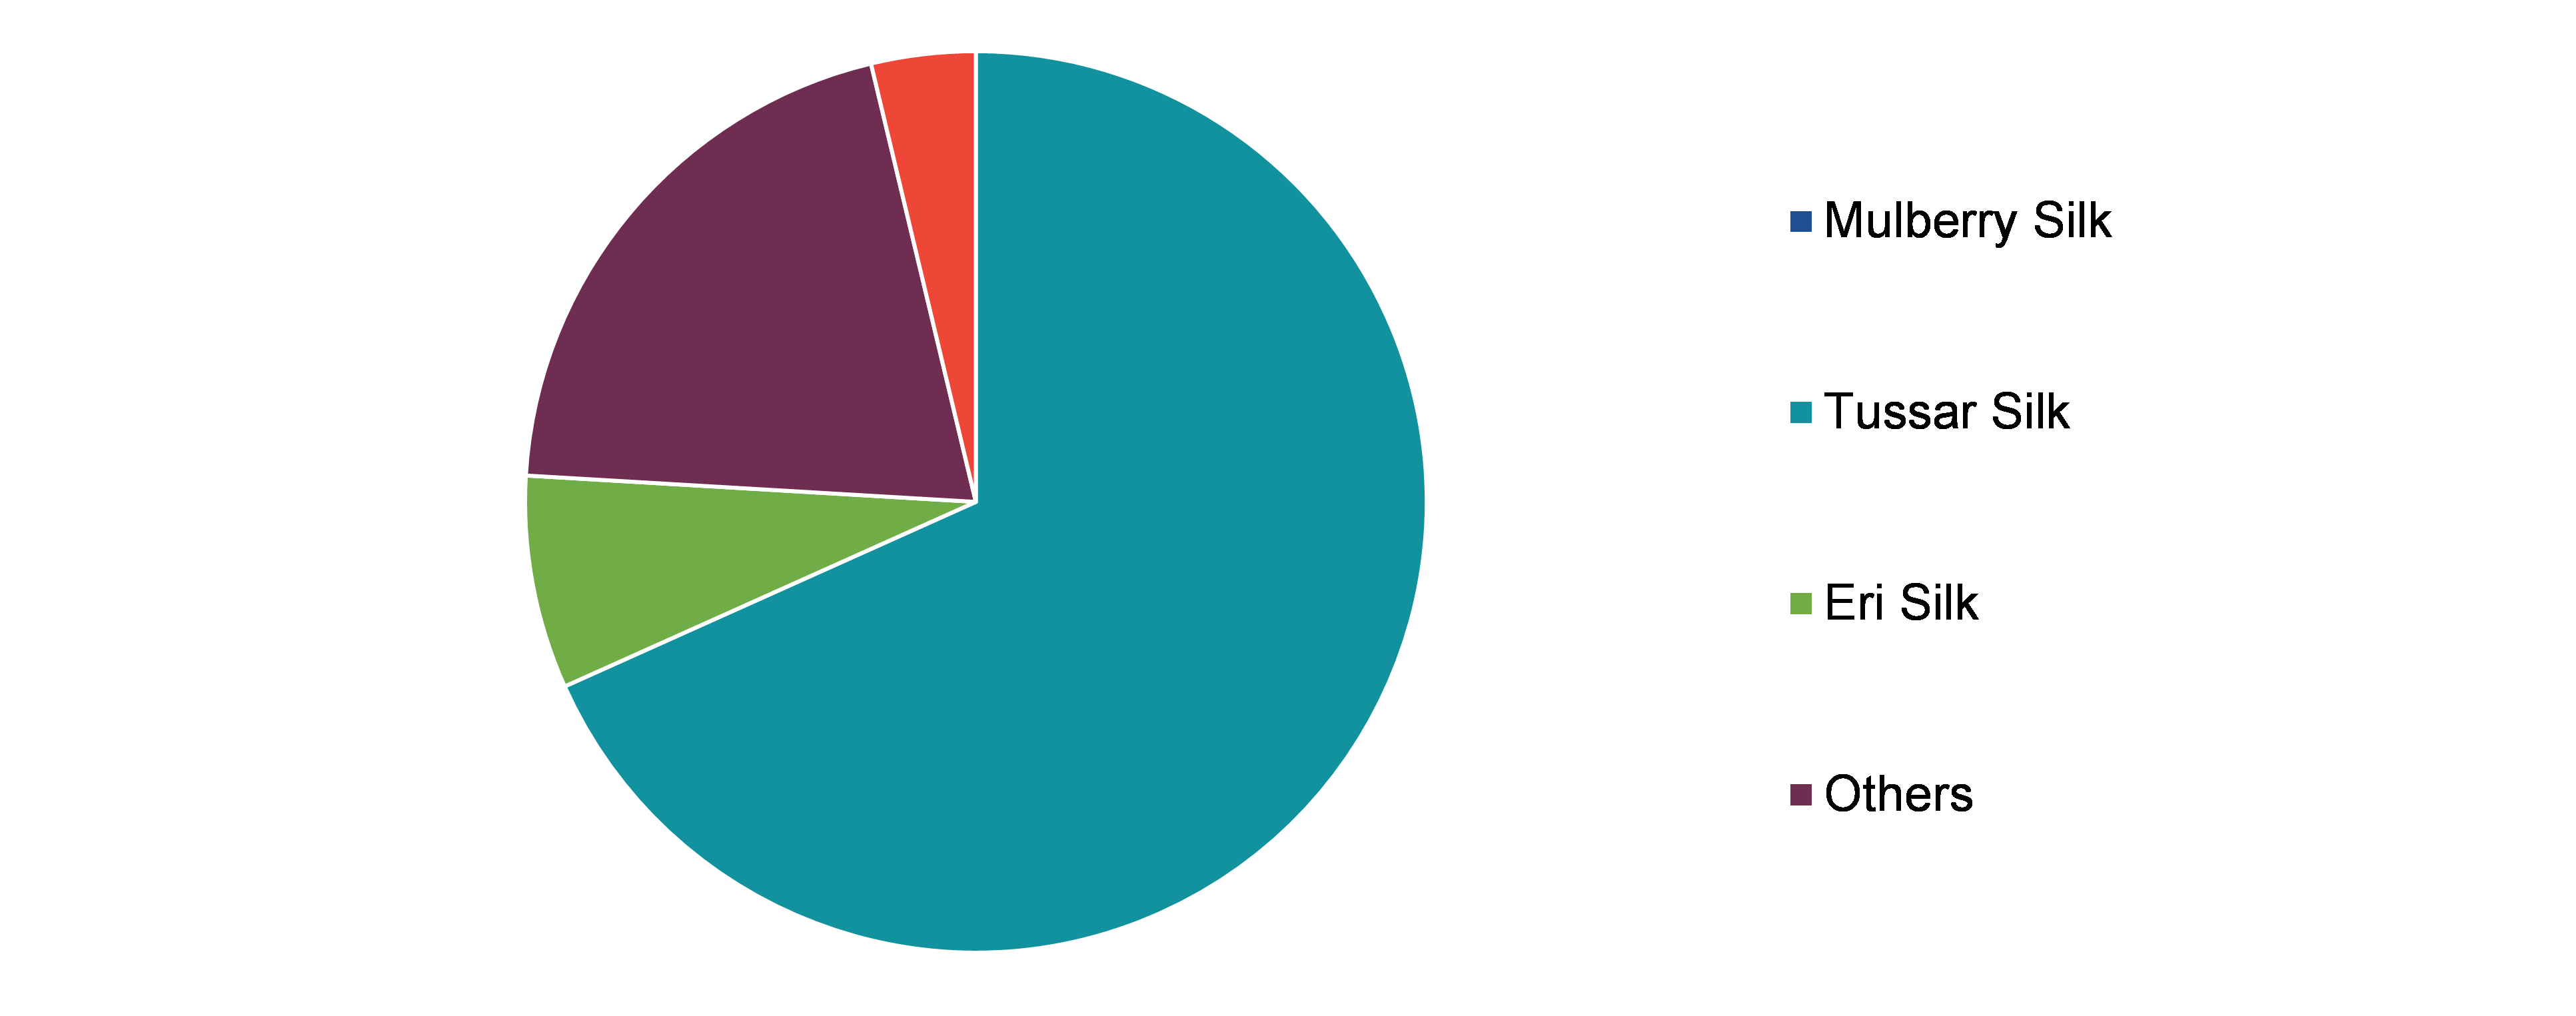 Global Silk Market Share, by Type	